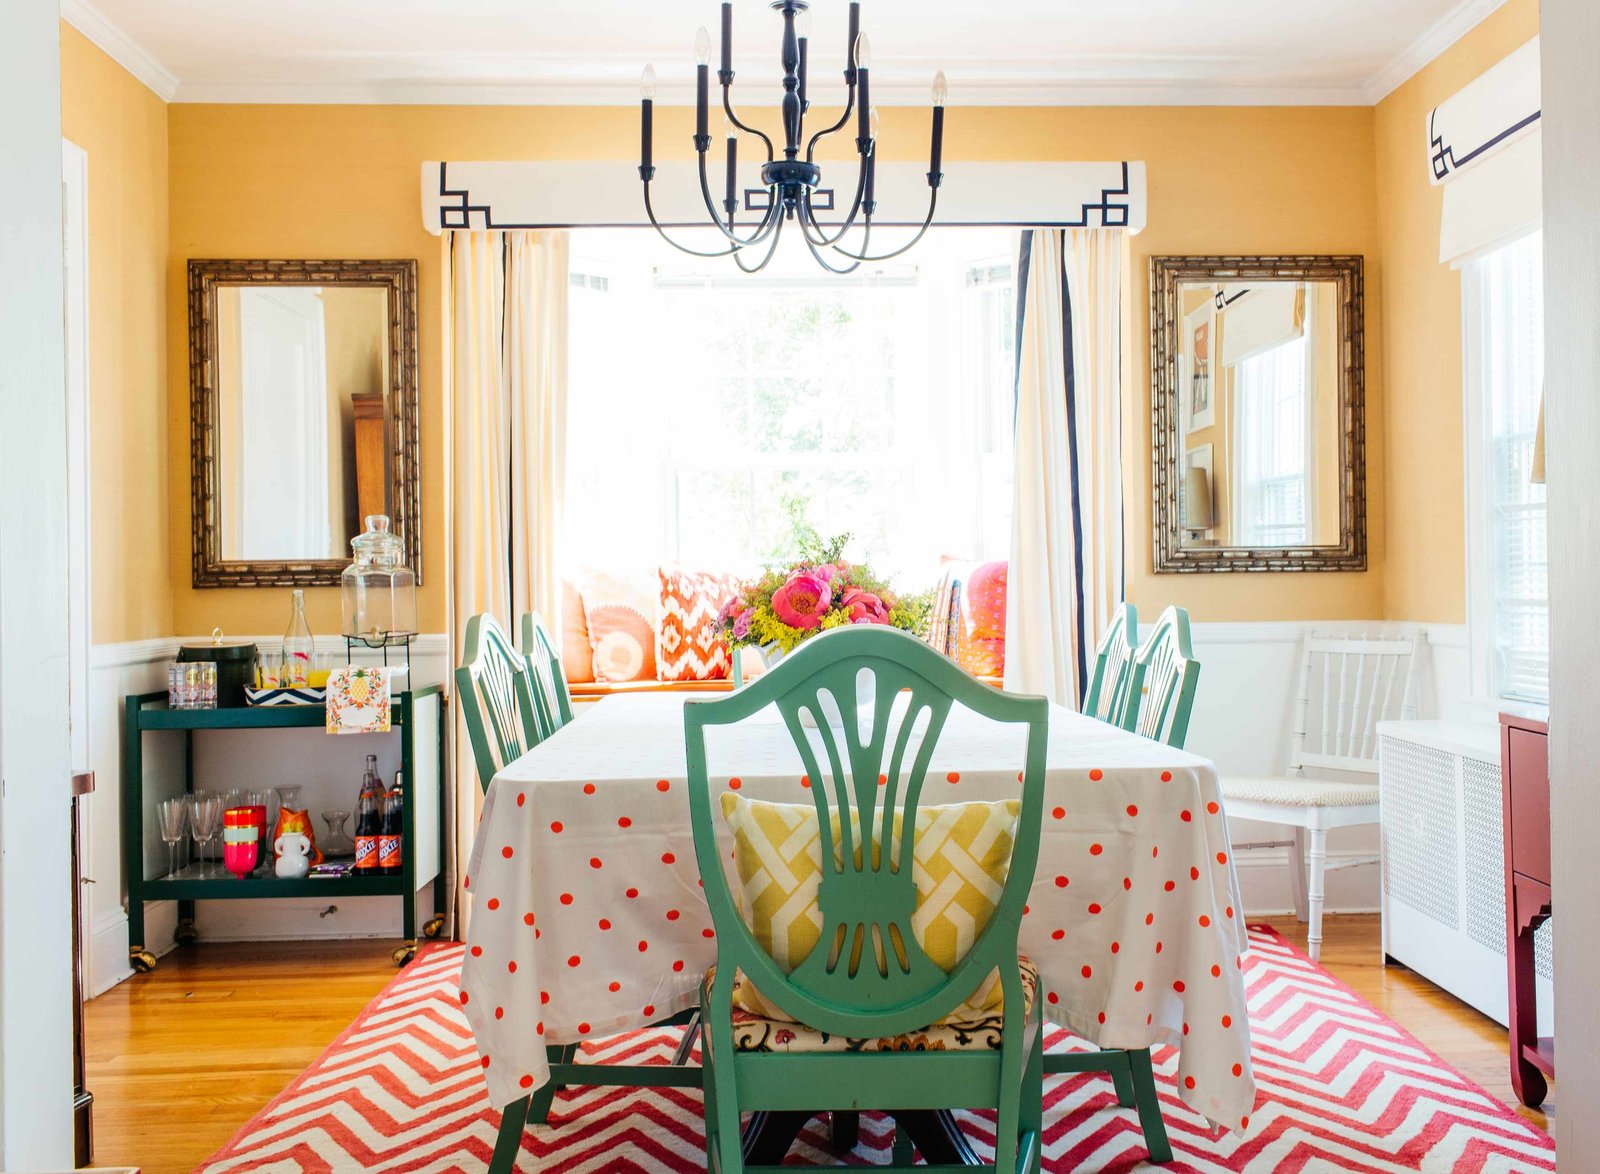 A yellow dining room with green chairs and chevron rug.